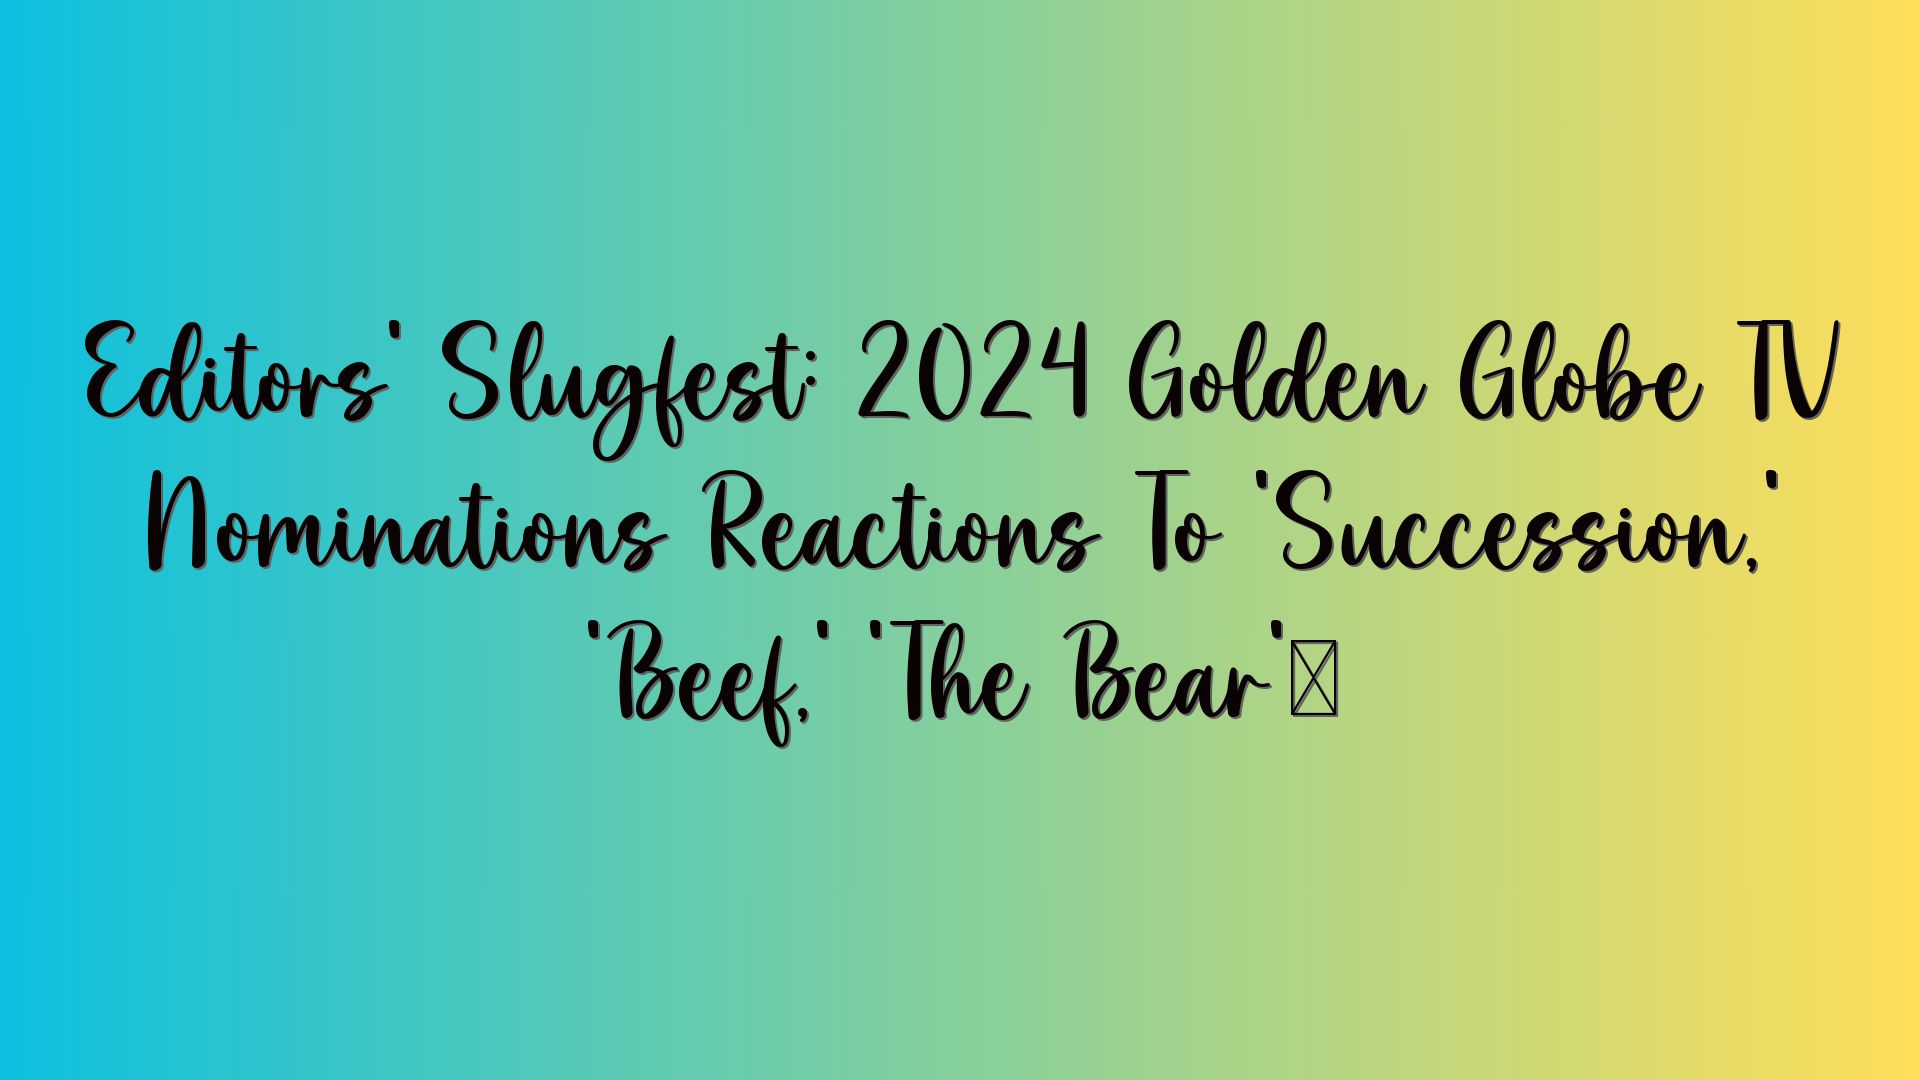 Editors’ Slugfest: 2024 Golden Globe TV Nominations Reactions To ‘Succession,’ ‘Beef,’ ‘The Bear’…